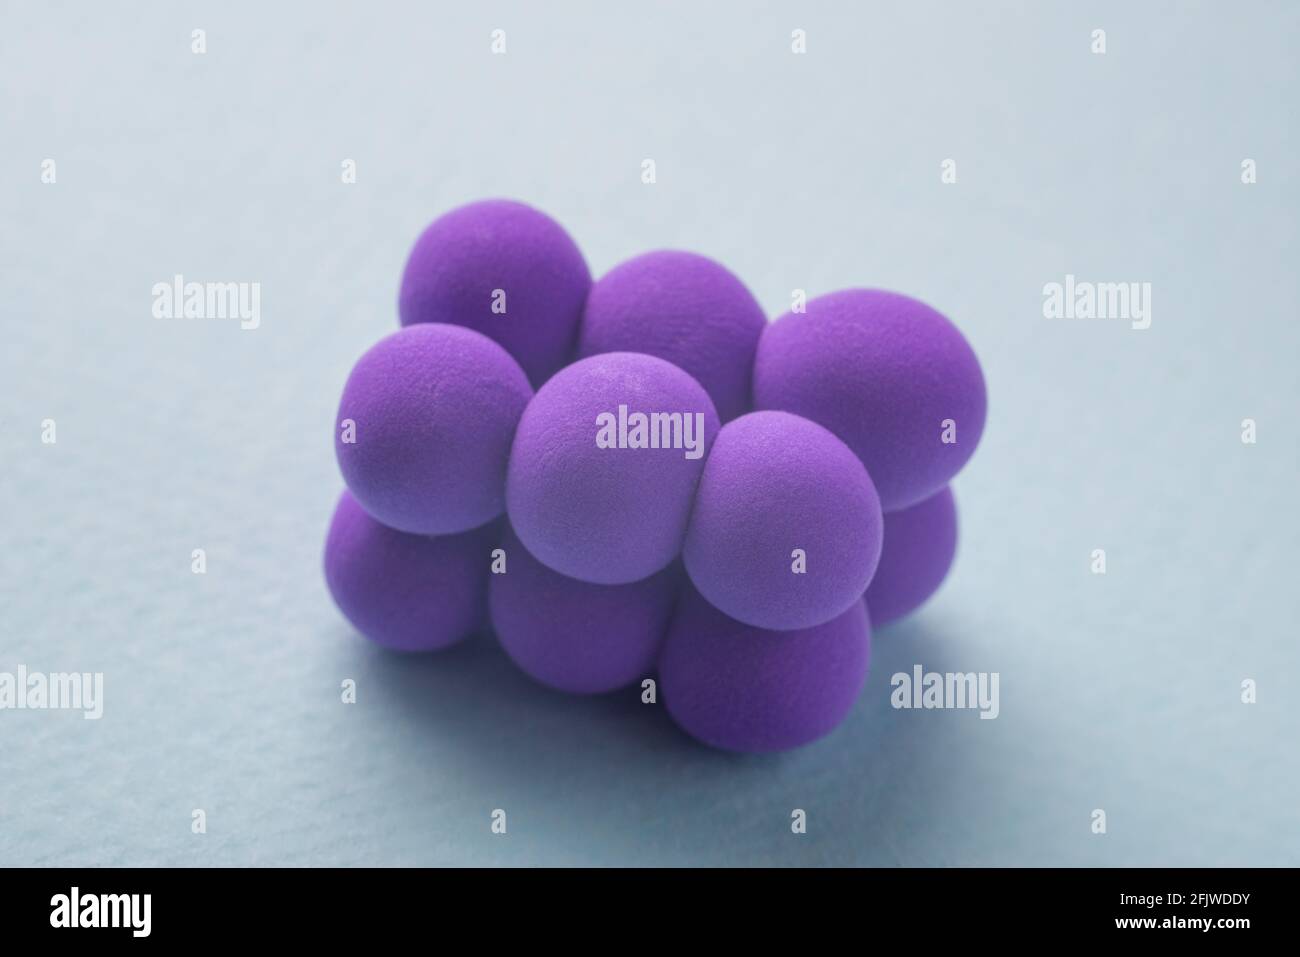 closeup of a pyogenic streptococcus model, against a blue background. Stock Photo